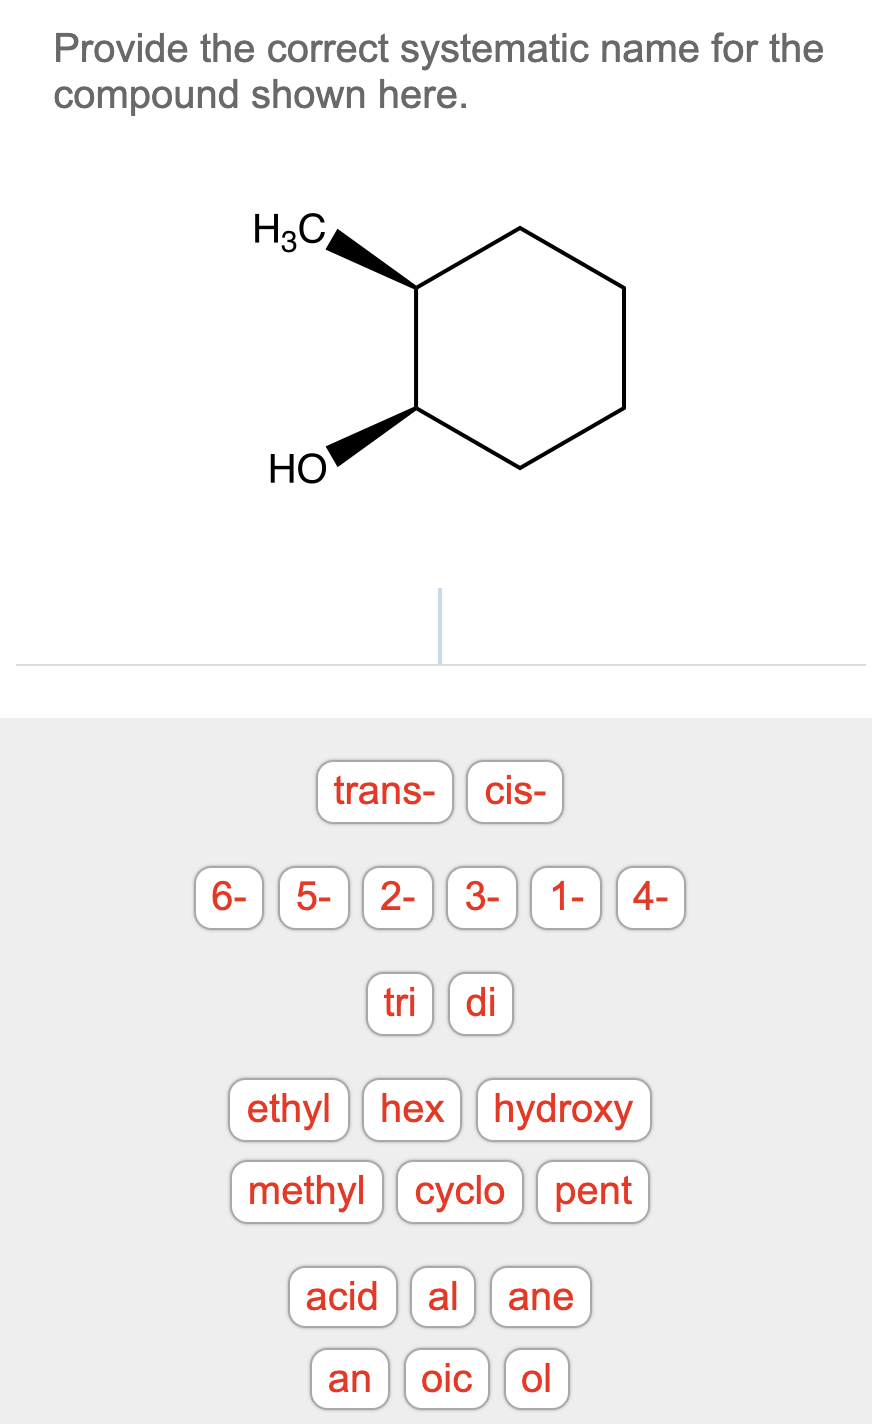 Provide the correct systematic name for the
compound shown here.
H3C
HO
trans-
cis-
6-
5-
2-
3-
1-|| 4-
tri
di
ethyl hexhydroxy
methyl cyclo pent
acid
al
ane
an
oic
ol
